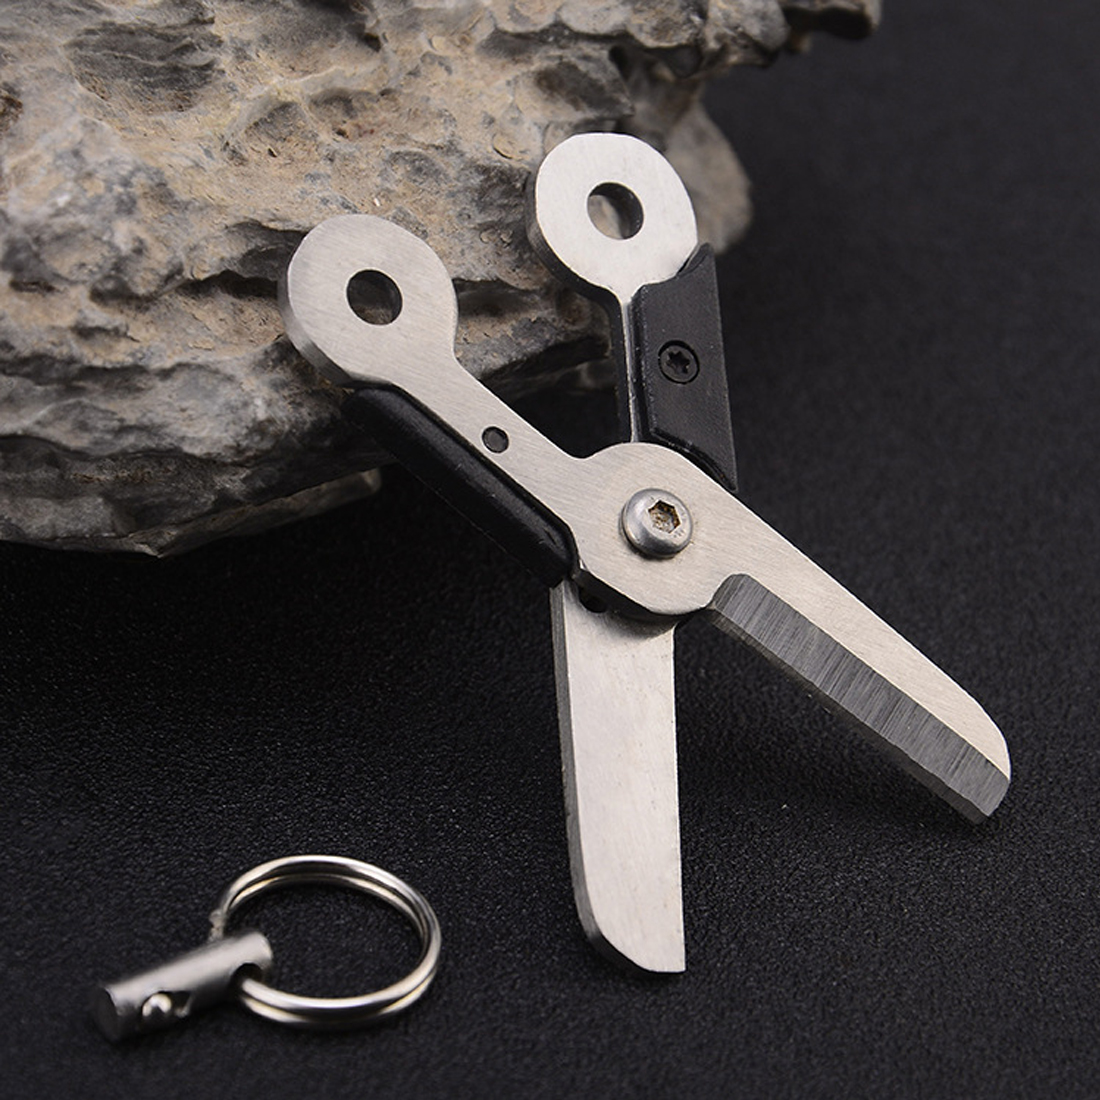 Outdoor Survival Mini Spring Scissor Pocket Tool Chain Steel Stainless Y7S0 W6R9